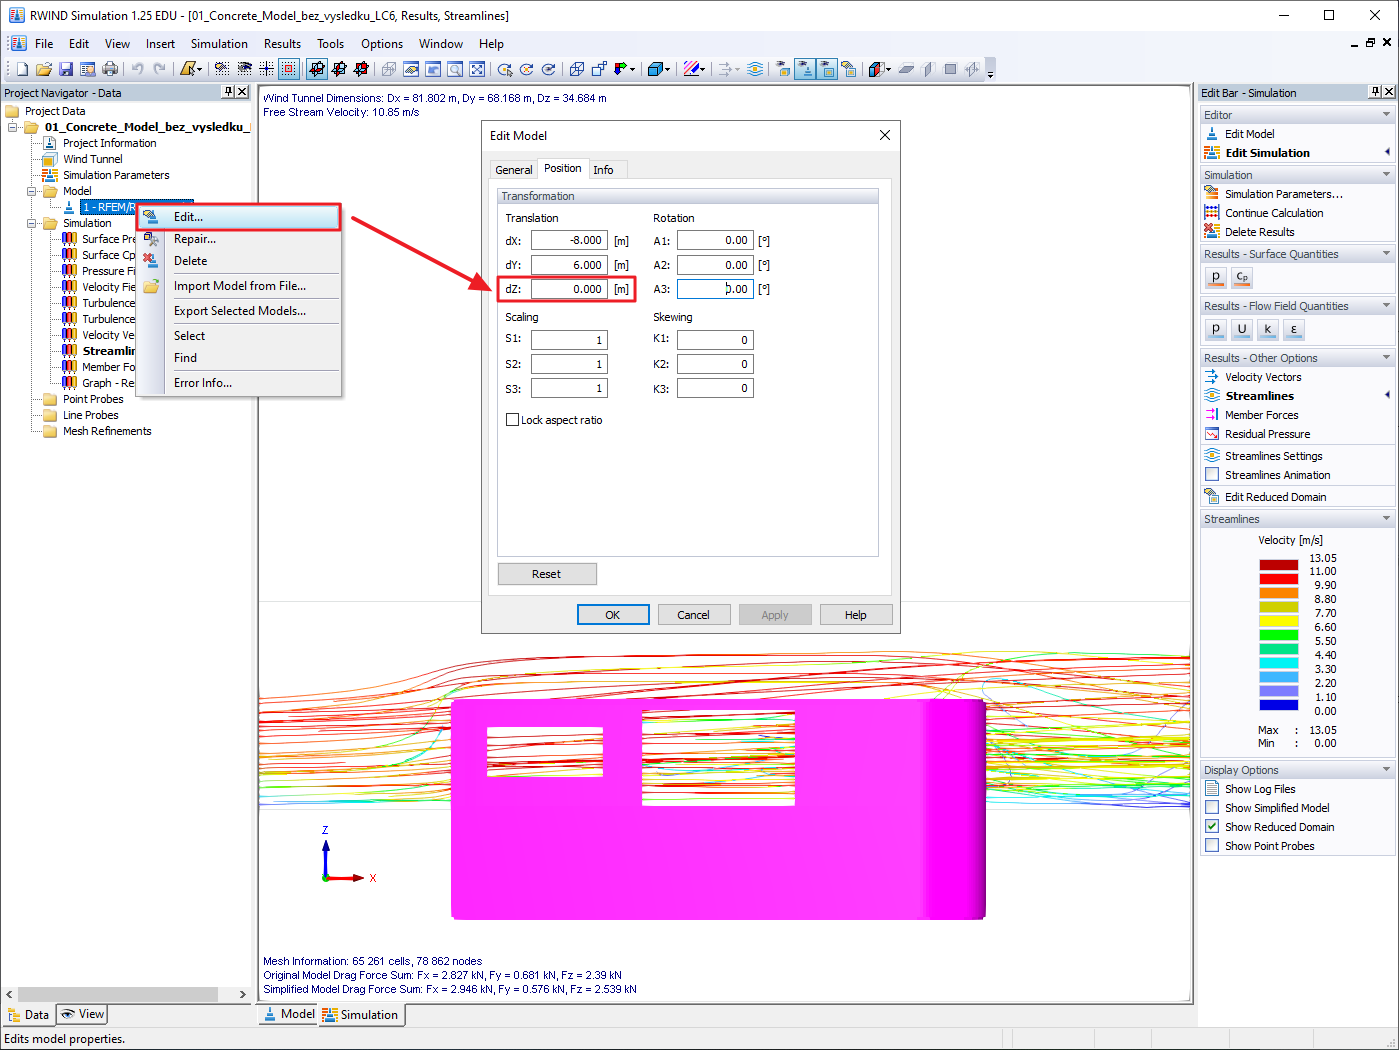 You can influence the position of the imported model using the dialog box Edit Model directly in RWIND Simulation.